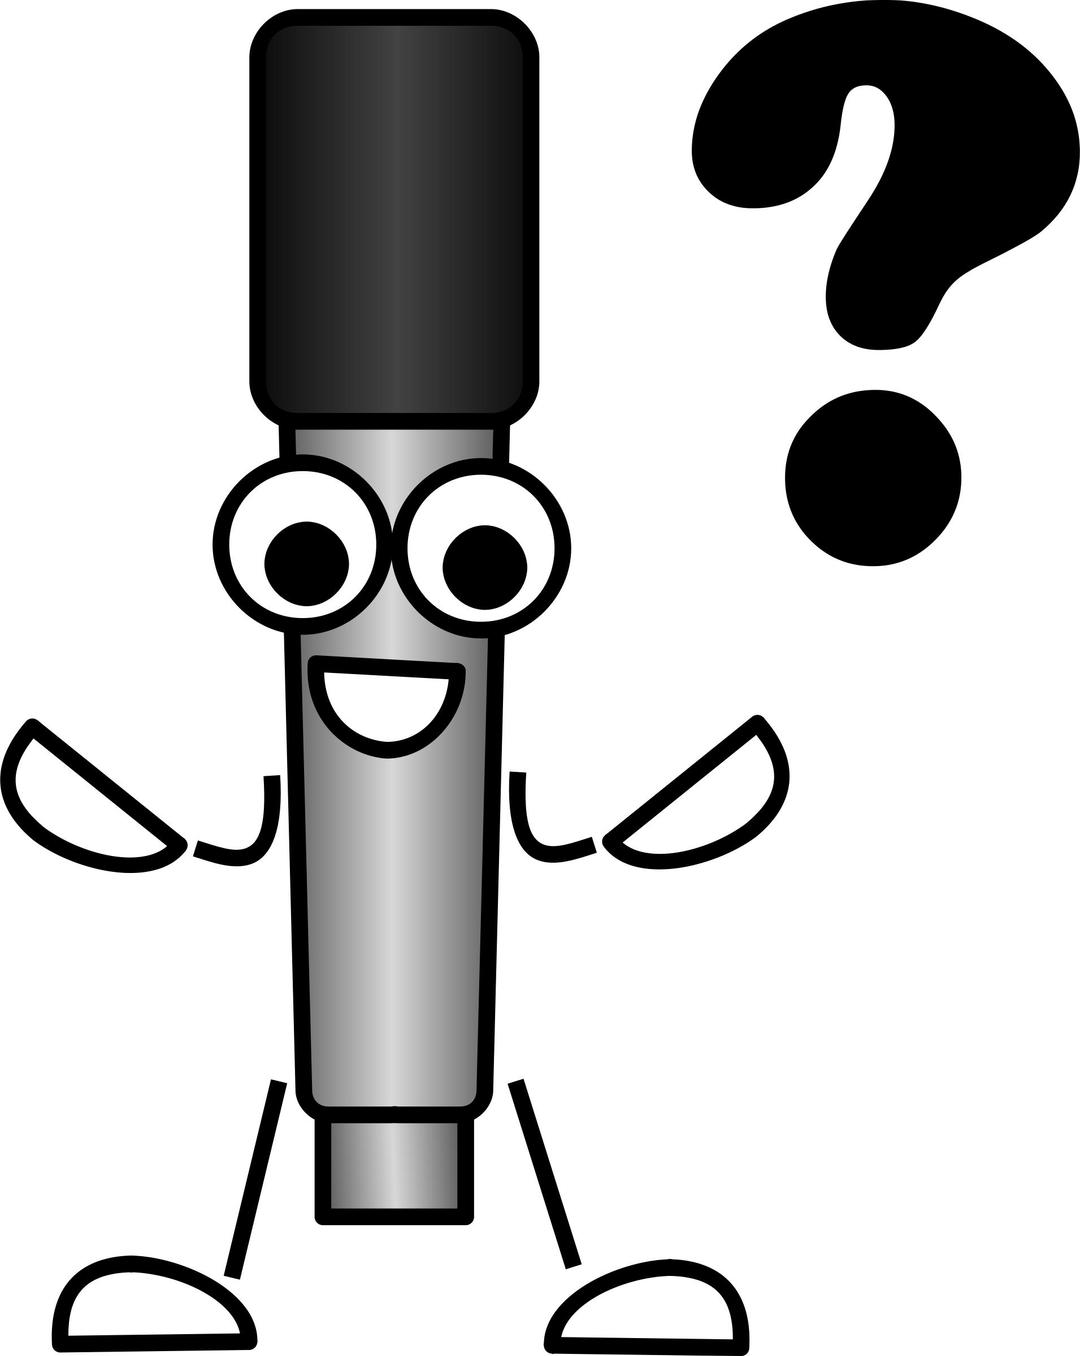 Mike the Mic Question png transparent